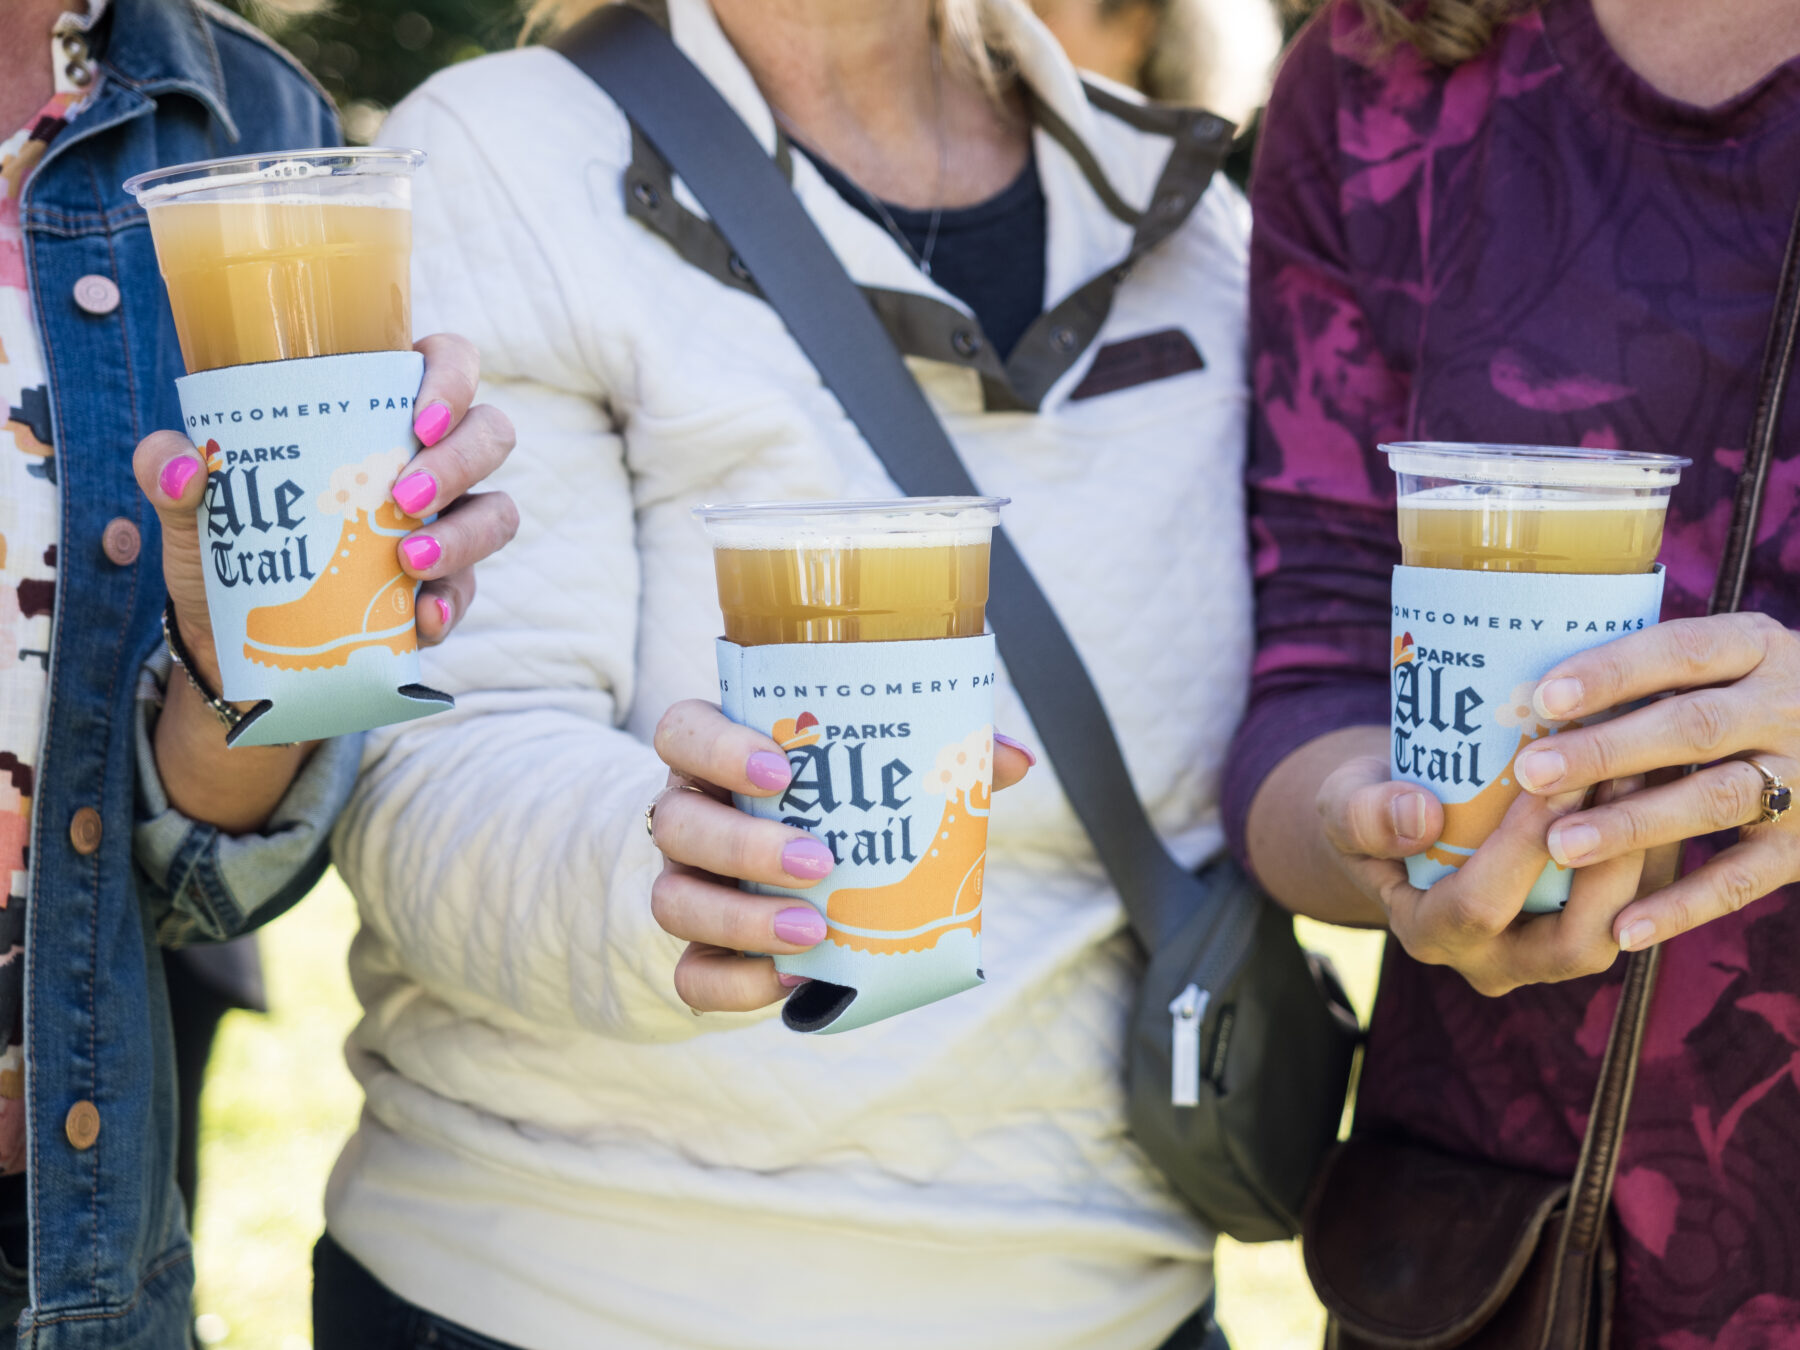 Upclose three people holding beer-filled plastic cups with Parks Ale Trail branded cozy.